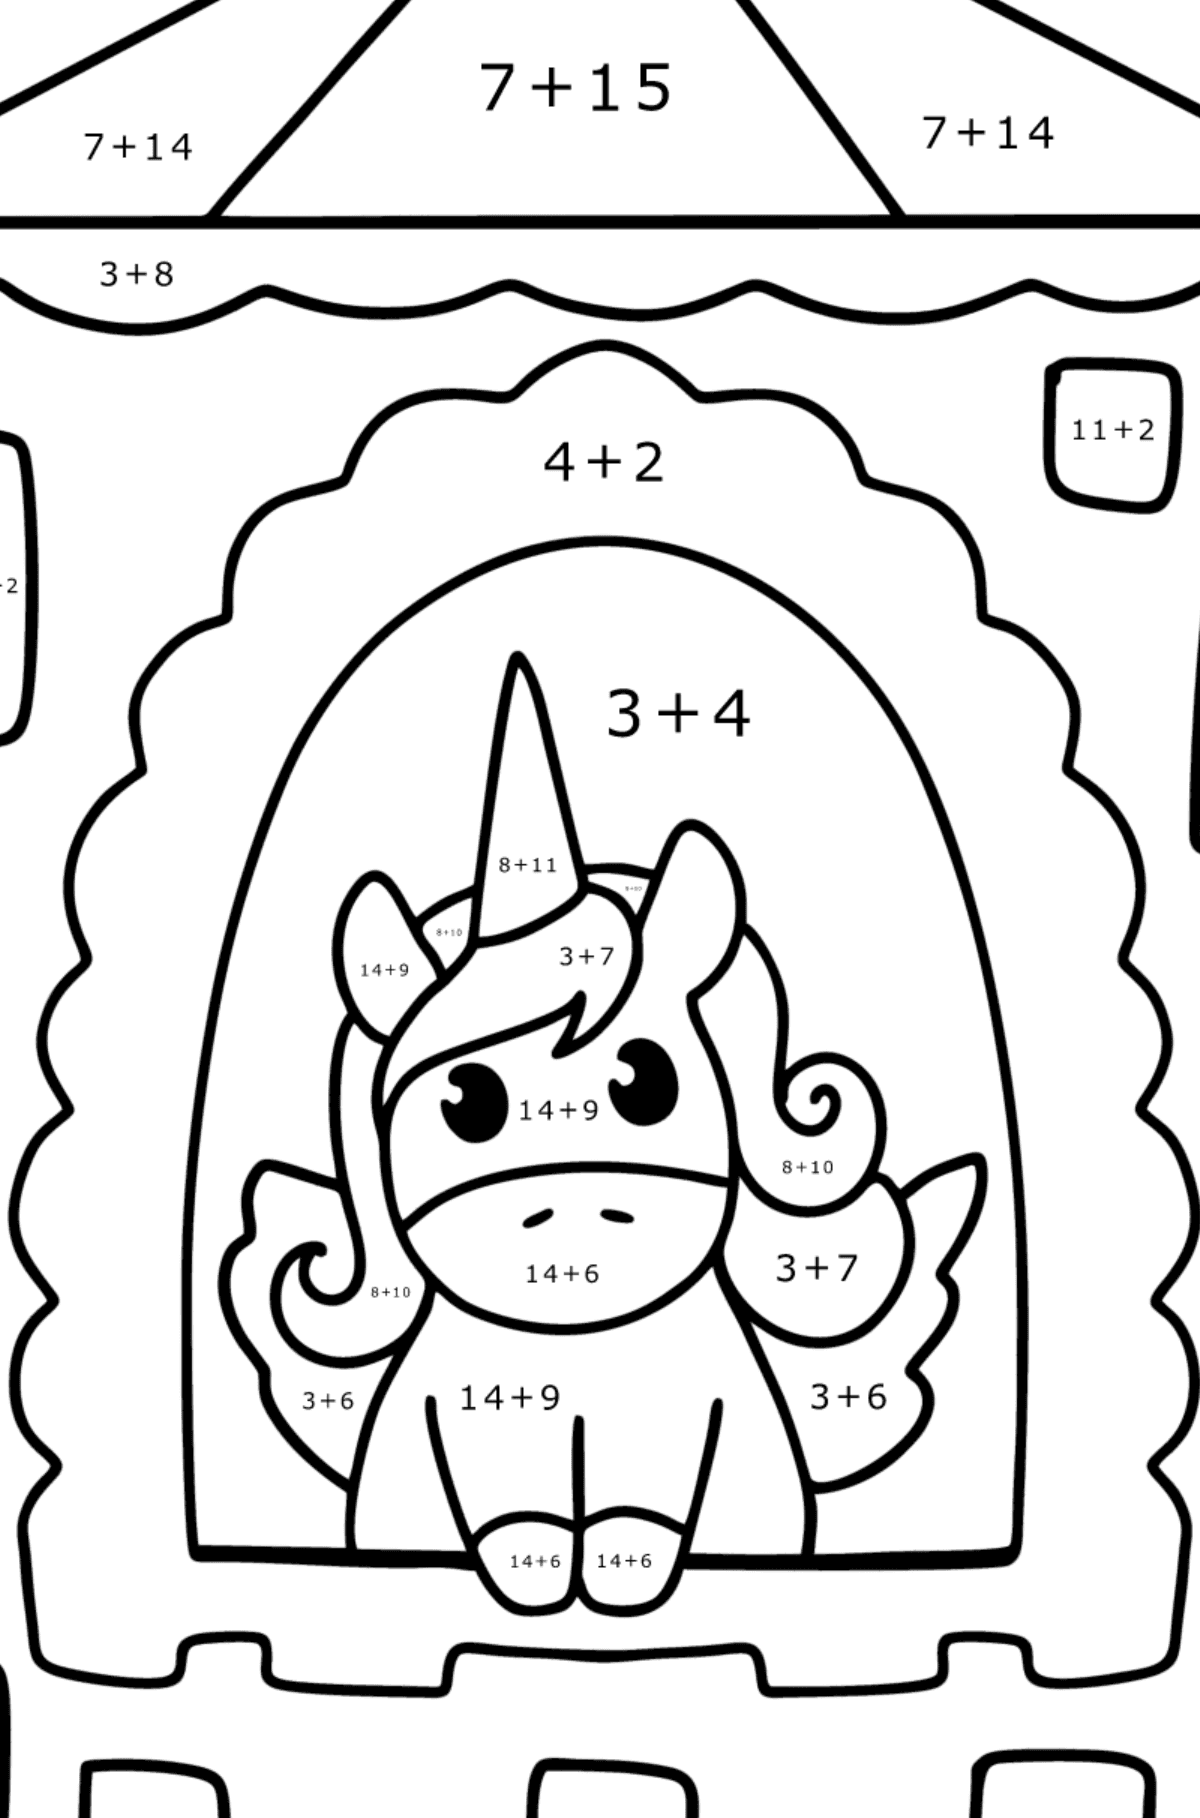 Unicorn in fairyland coloring page - Math Coloring - Addition for Kids